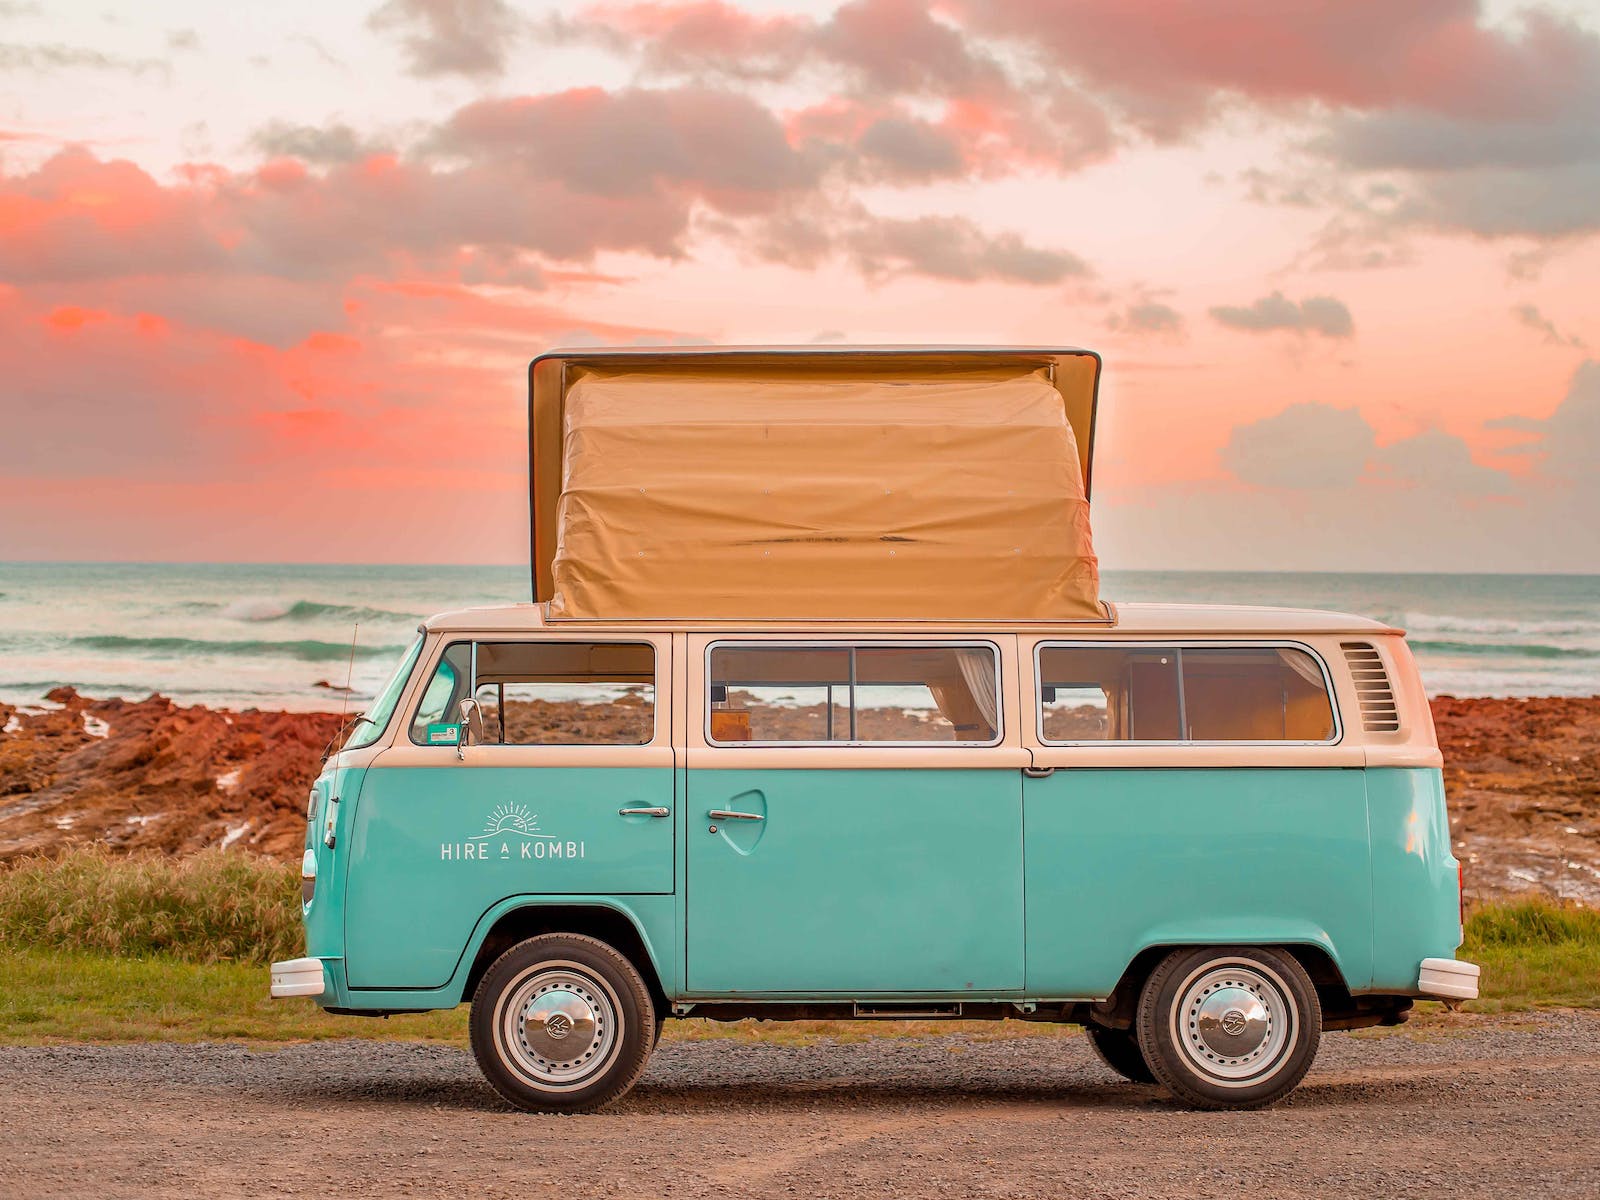 A Hire a Kombi teal coloured kombi van with its top popped beside the beach.